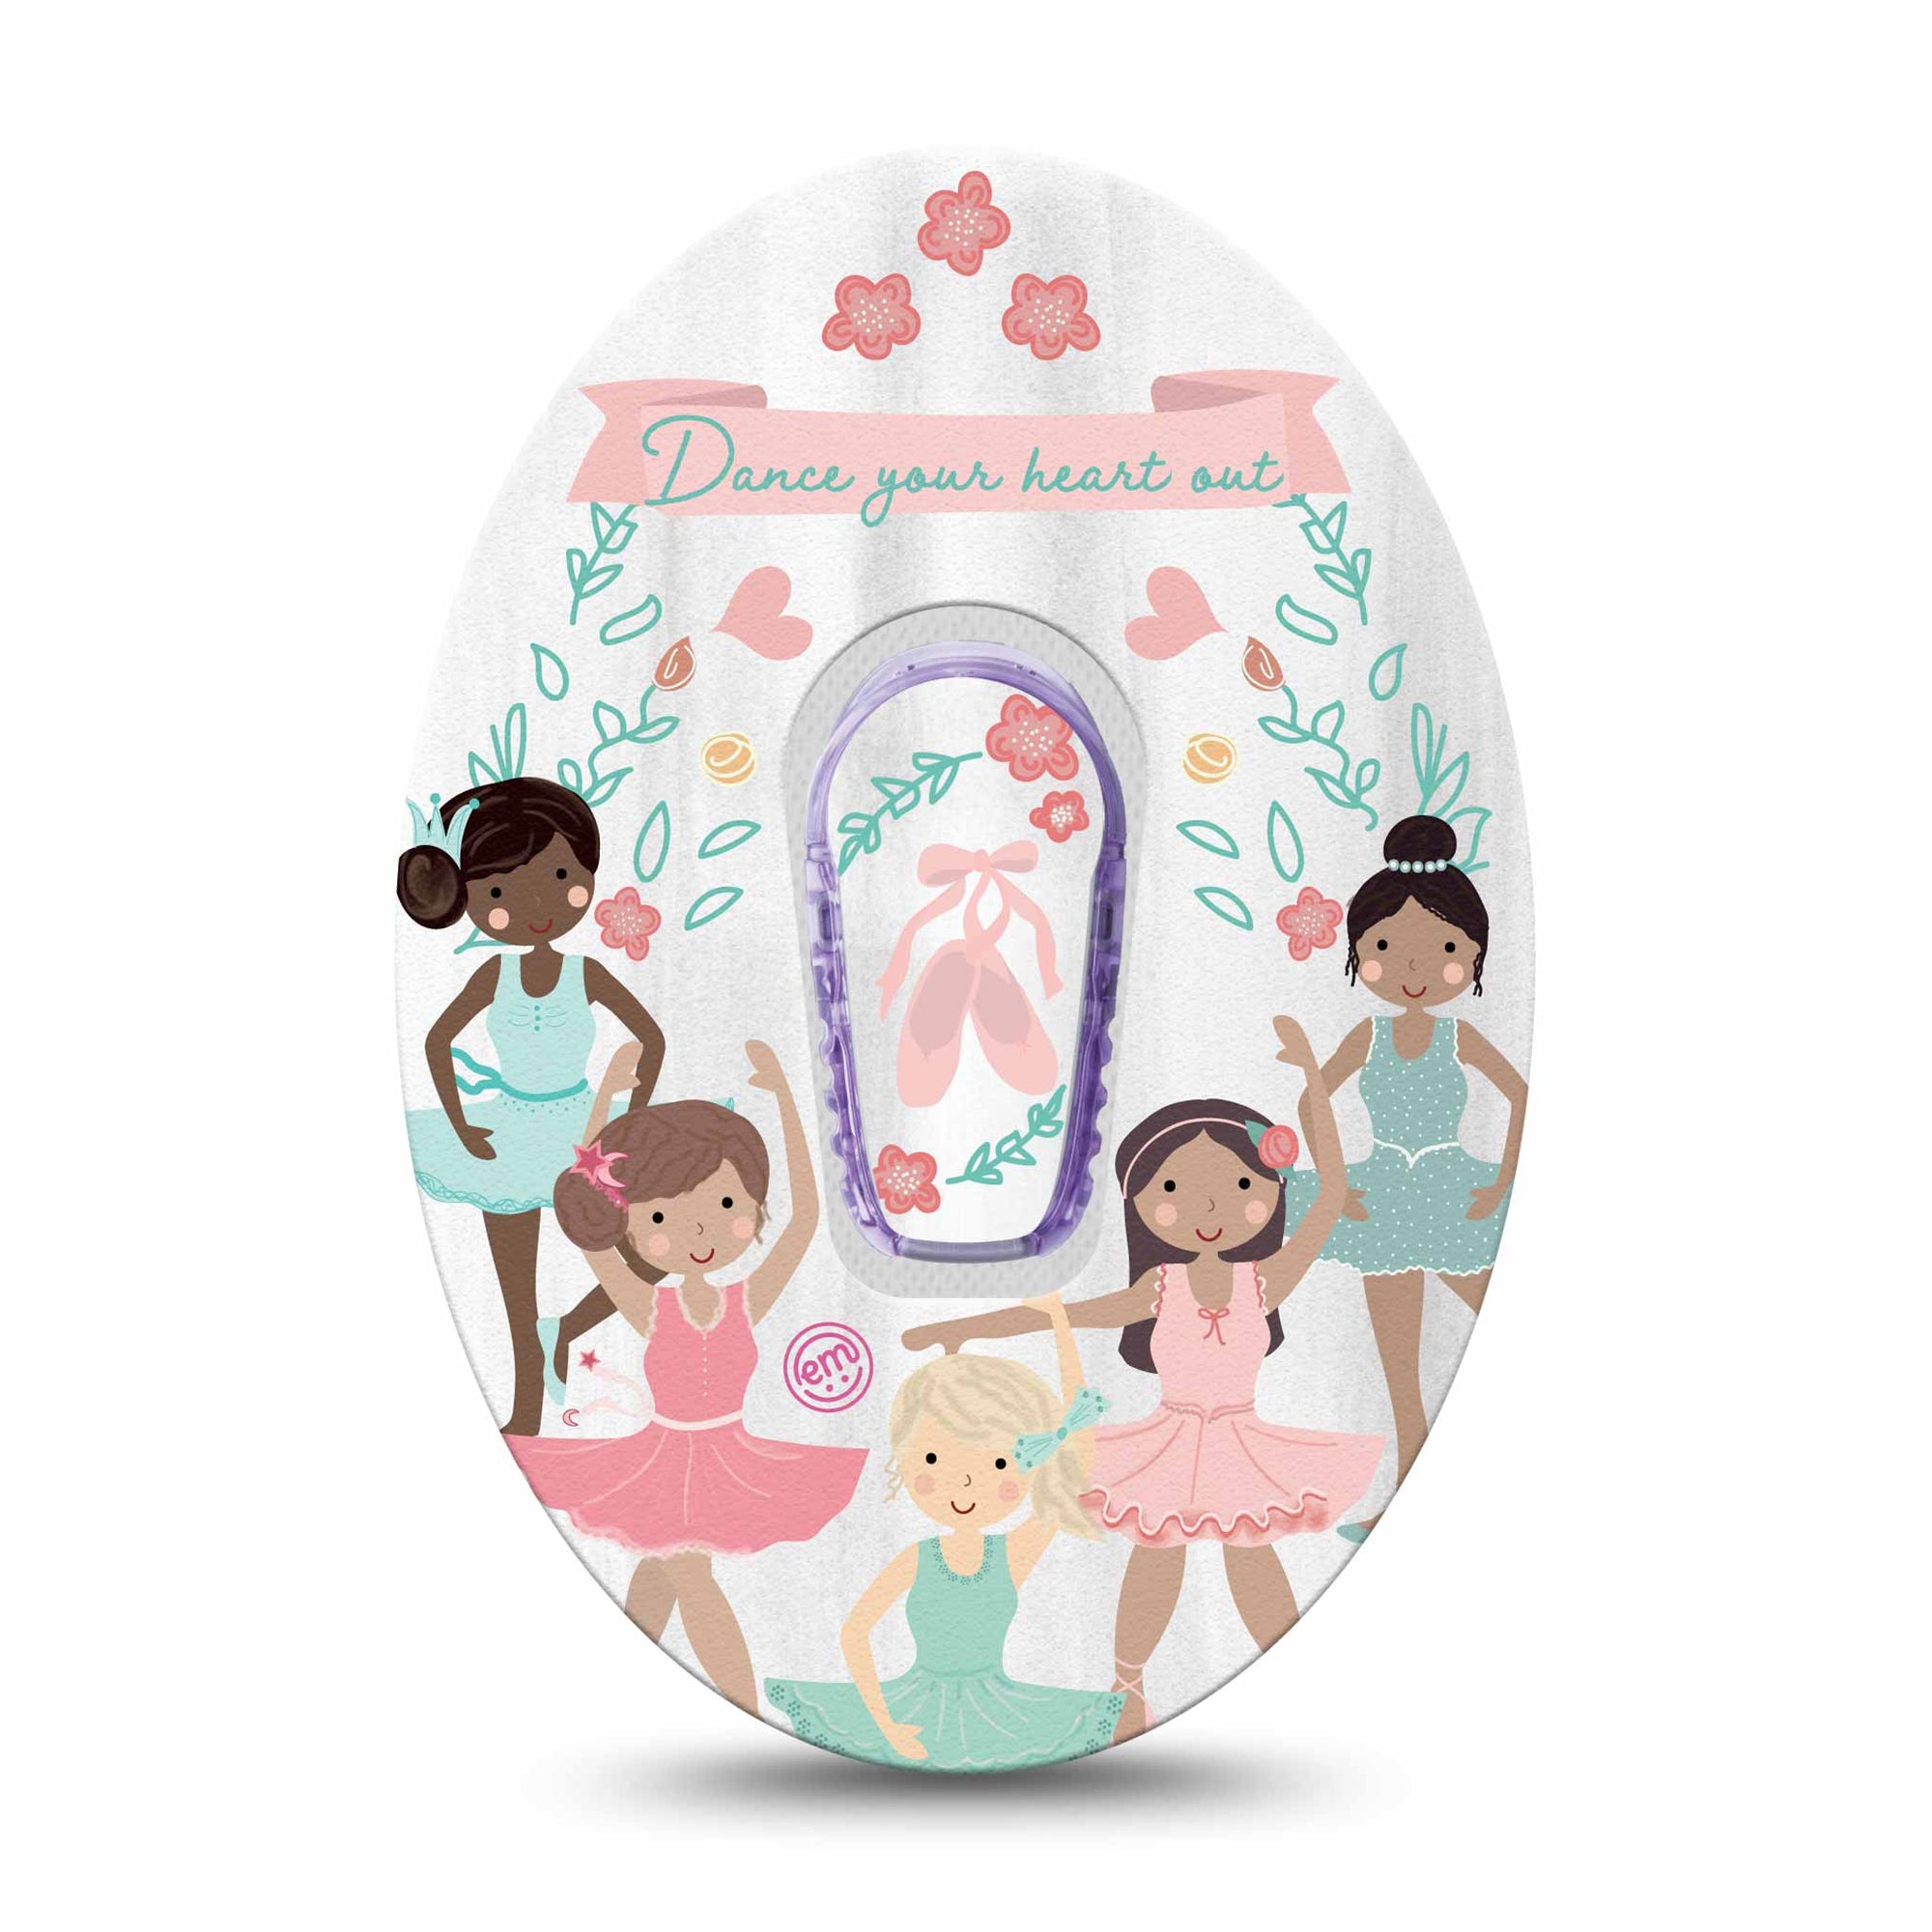 ExpressionMed Ballerinas Dexcom G6 Transmitter Sticker, Single Sticker Only, Pink Ballet Slippers themed CGM vinyl device center sticker design with matching Plaster Patch Tape